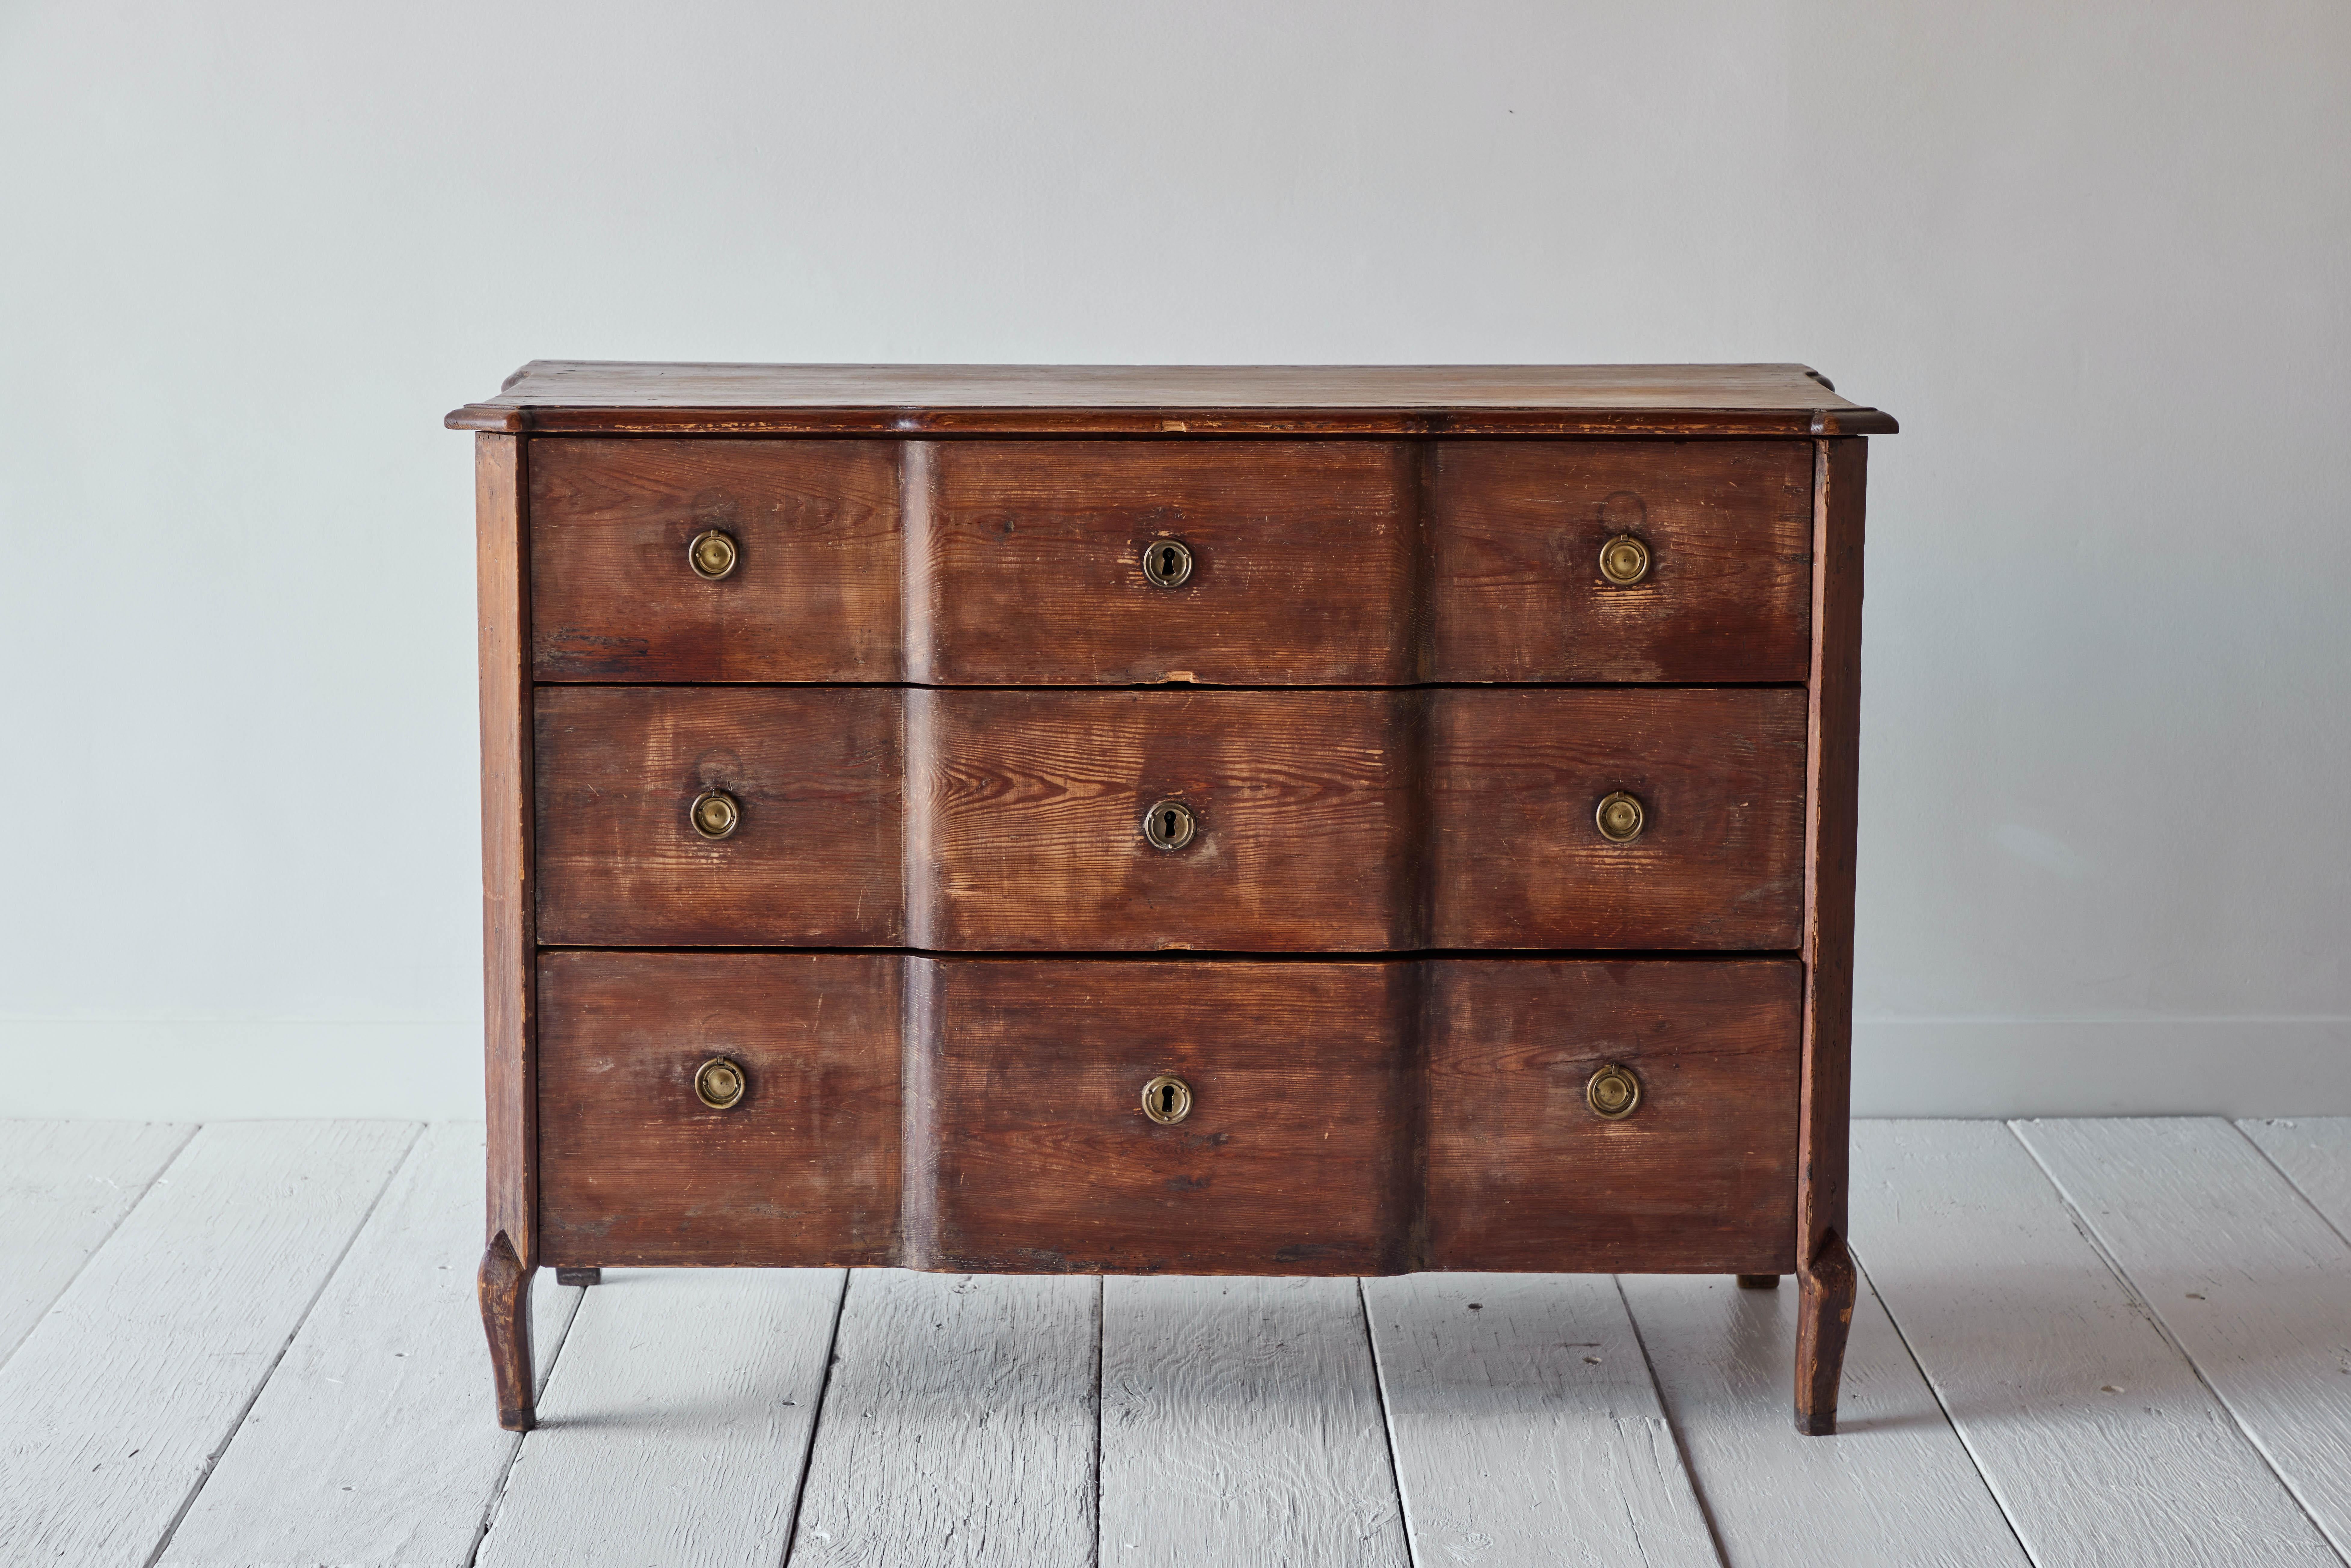 This elegant chest of drawers is a beautiful example of Swedish adaptation of the French Louis XVI style during the reign of King Gustav III of Sweden. The three drawer dresser stands on four pointed feet and has its original bronze fitting and